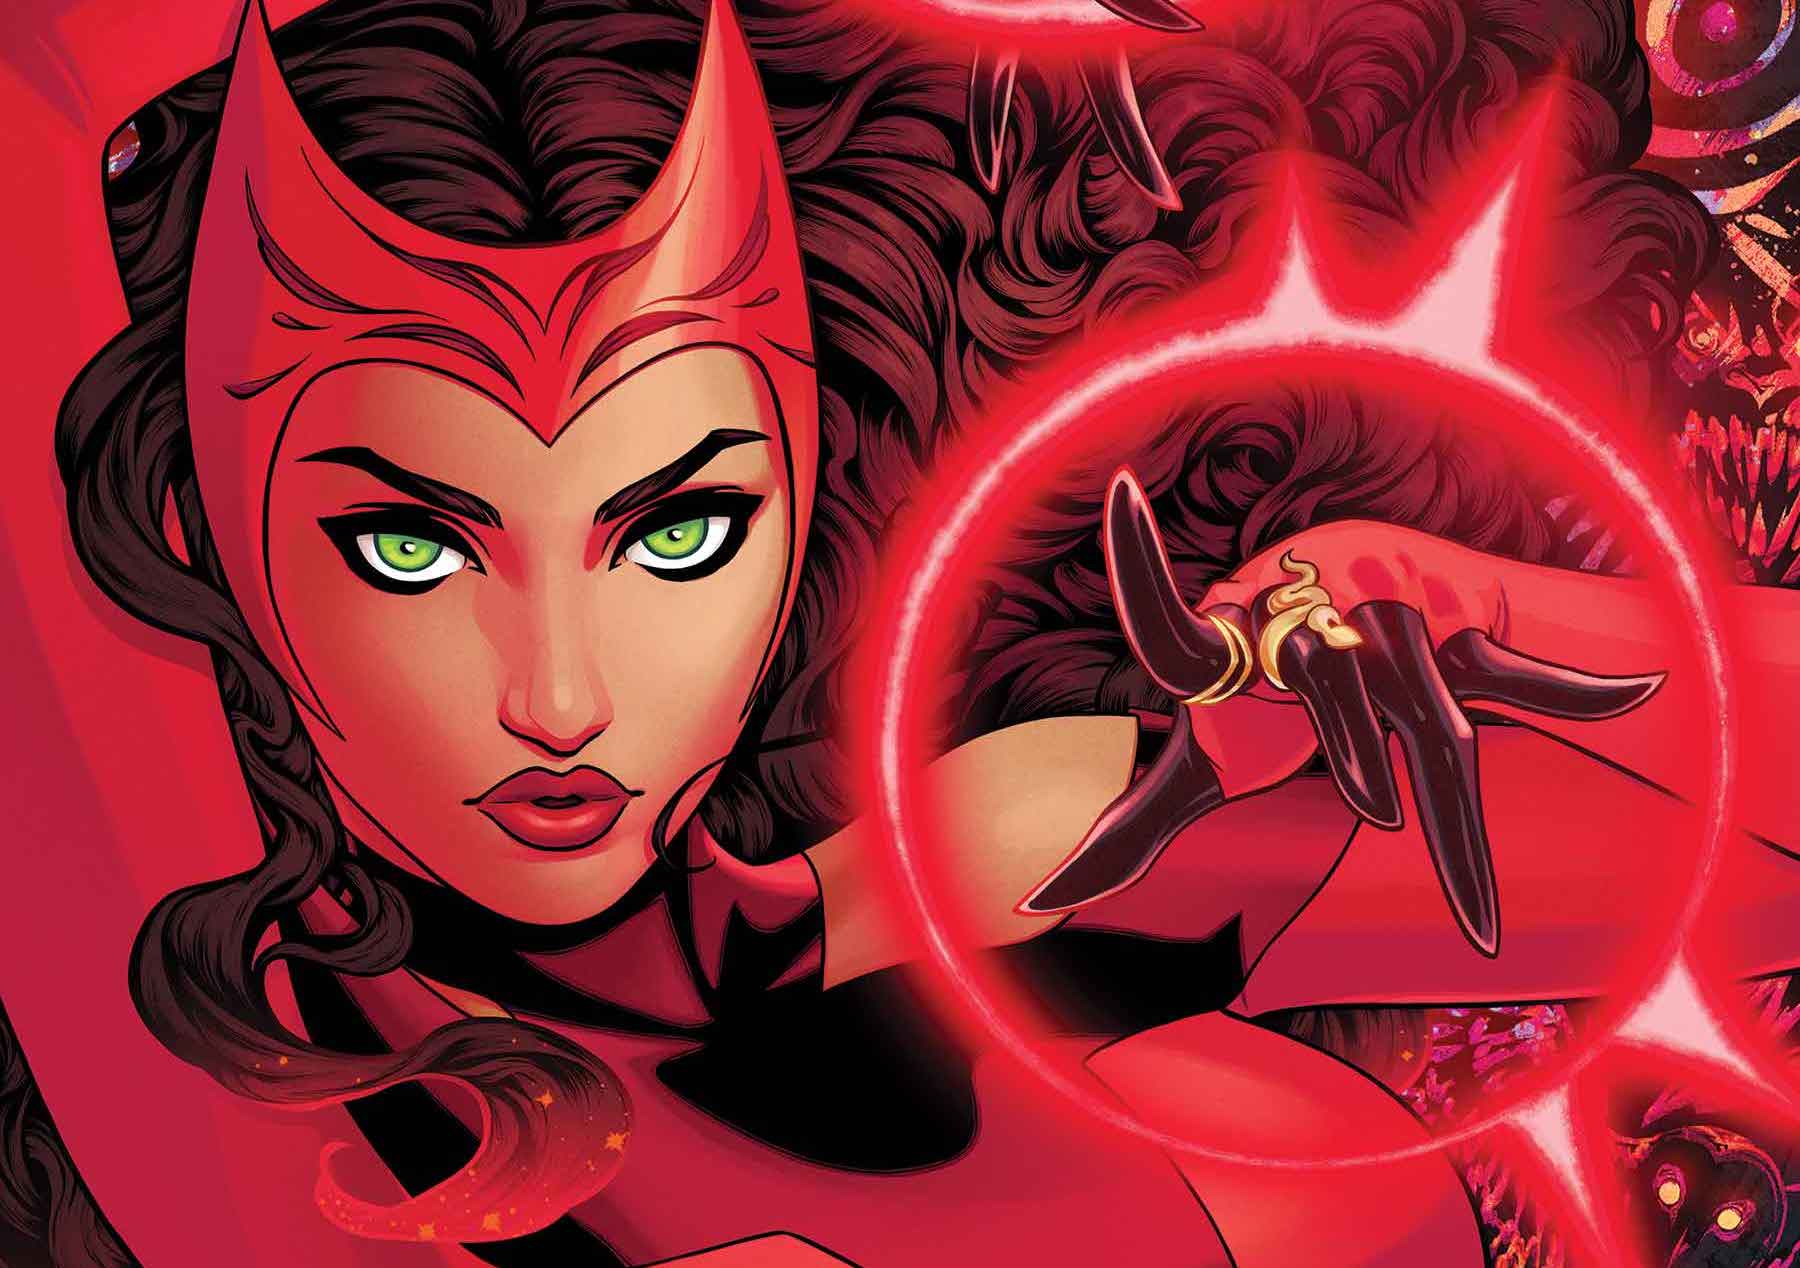 The Cataclysmic Poet: A Conversation with Steve Orlando on 'Scarlet Witch' #1